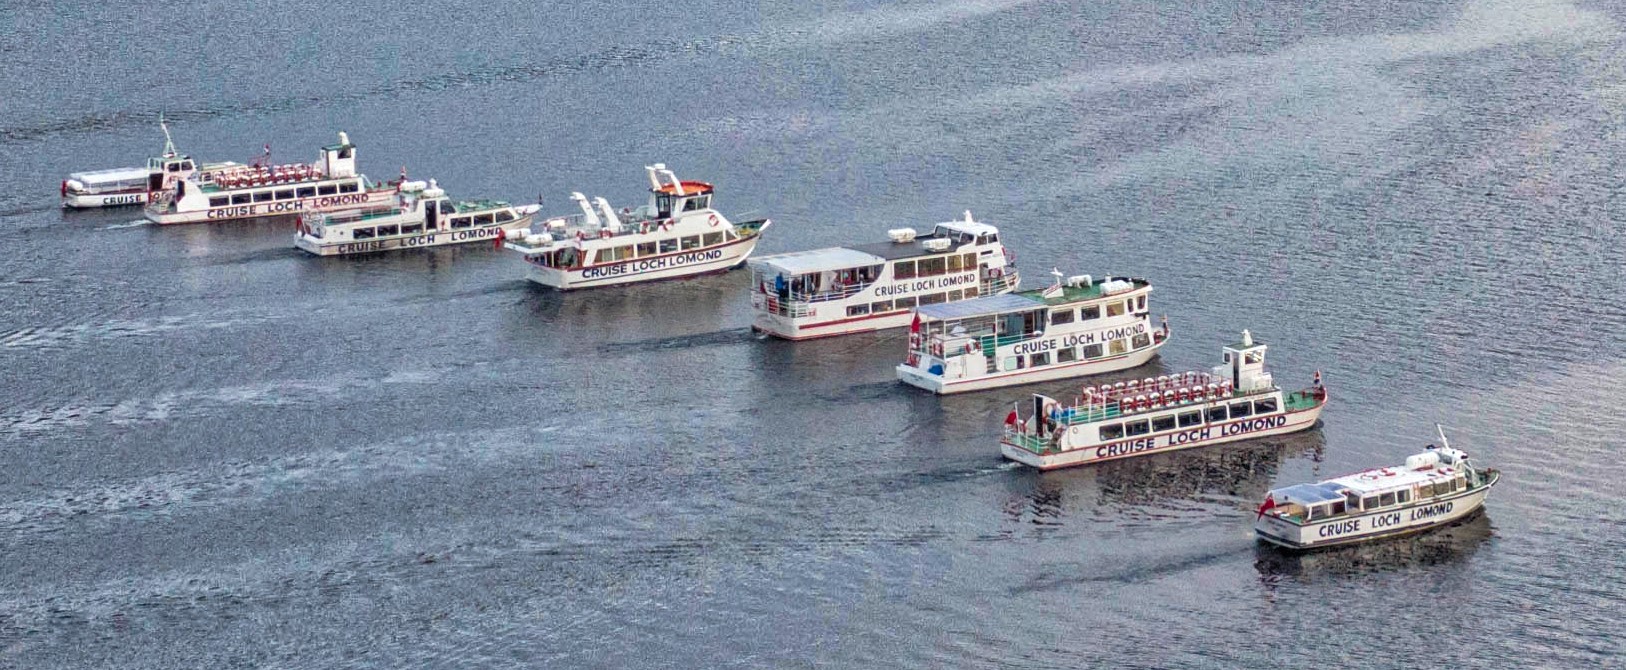 Superb photo featuring tghe cruise on Loch lomond and their entire fleet